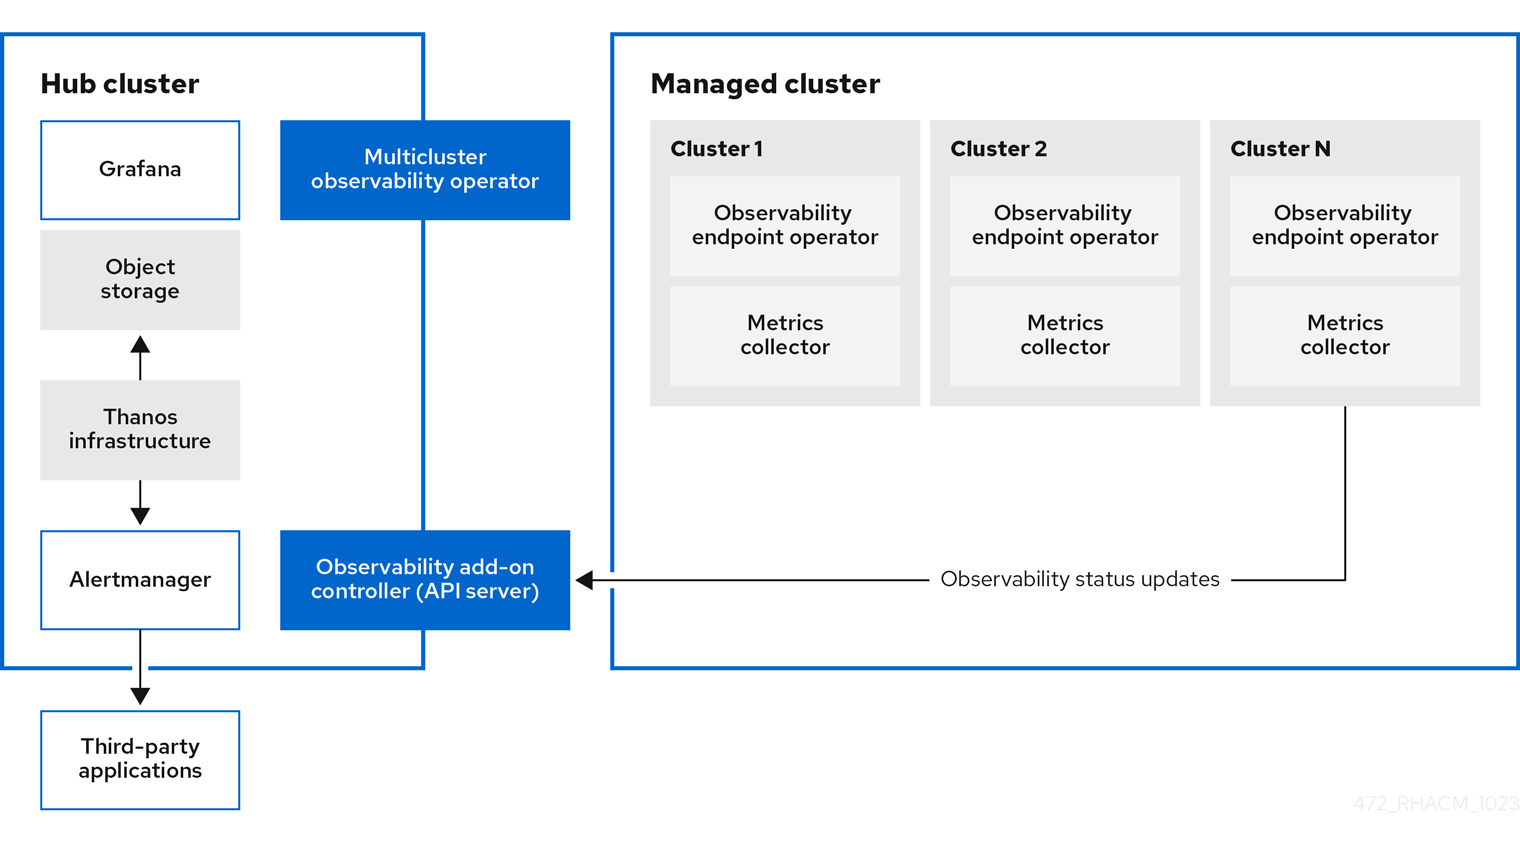 Multicluster observability architecture